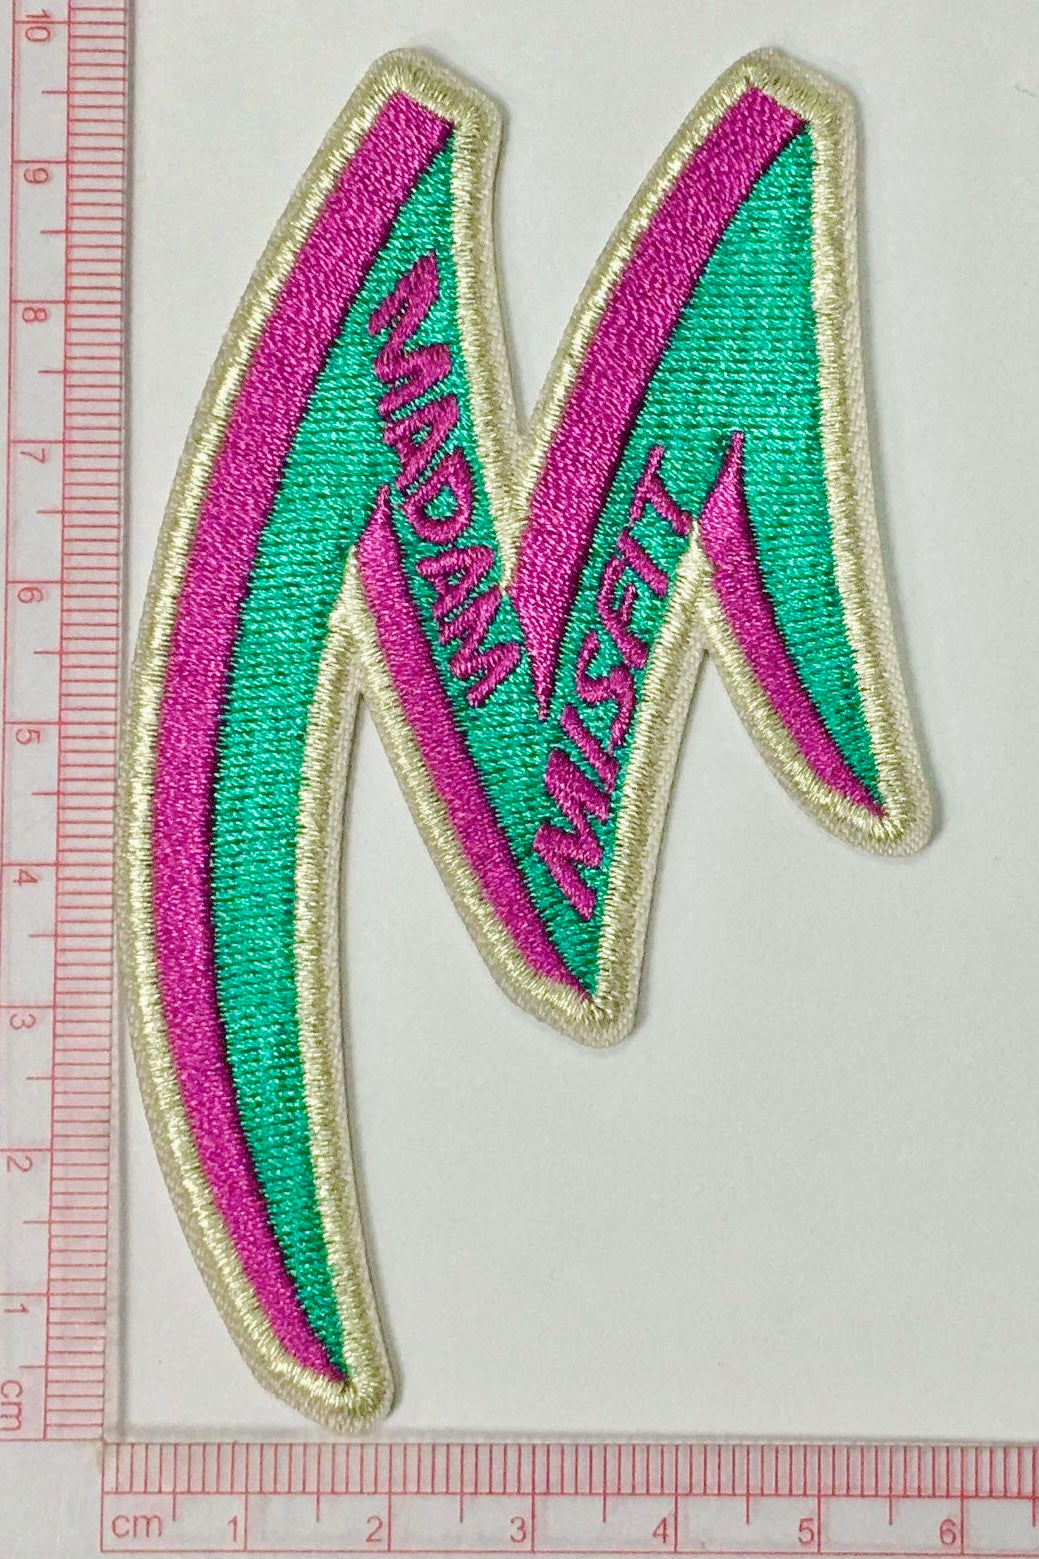 Madam Misfit Embroidered Patch - IRON ON